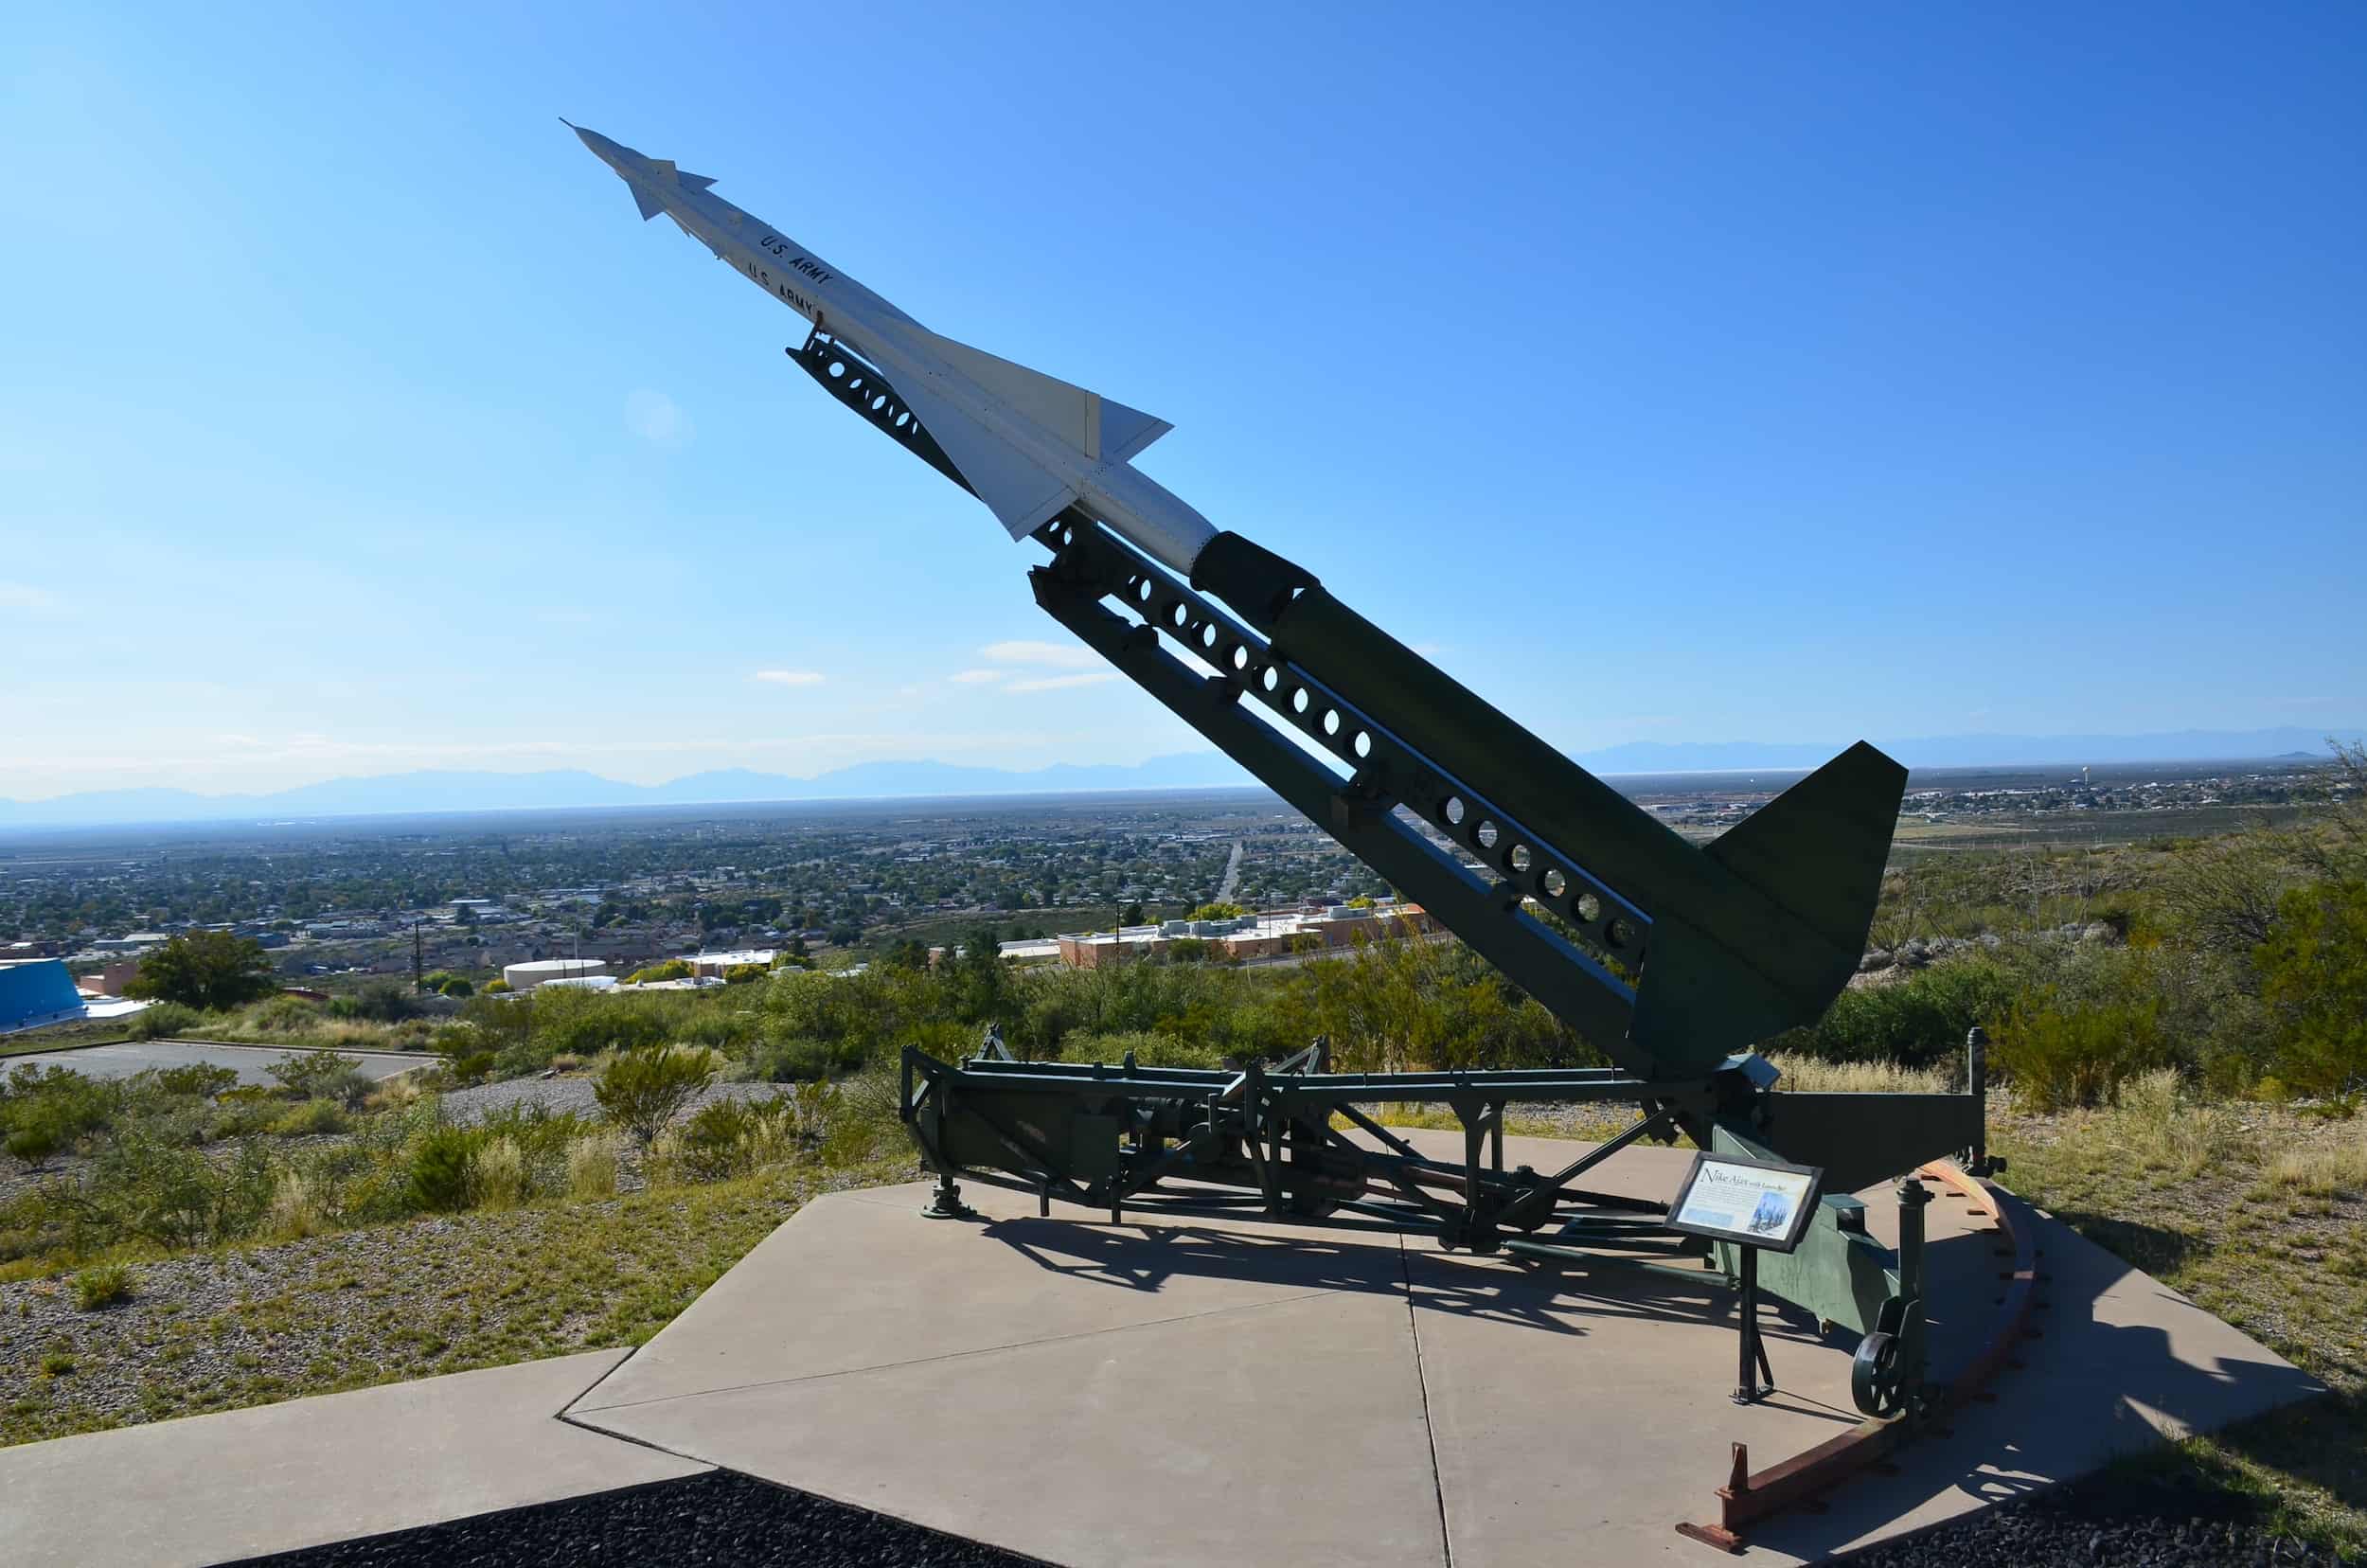 Nike Ajax missile with launcher at the New Mexico Museum of Space History in Alamogordo, New Mexico